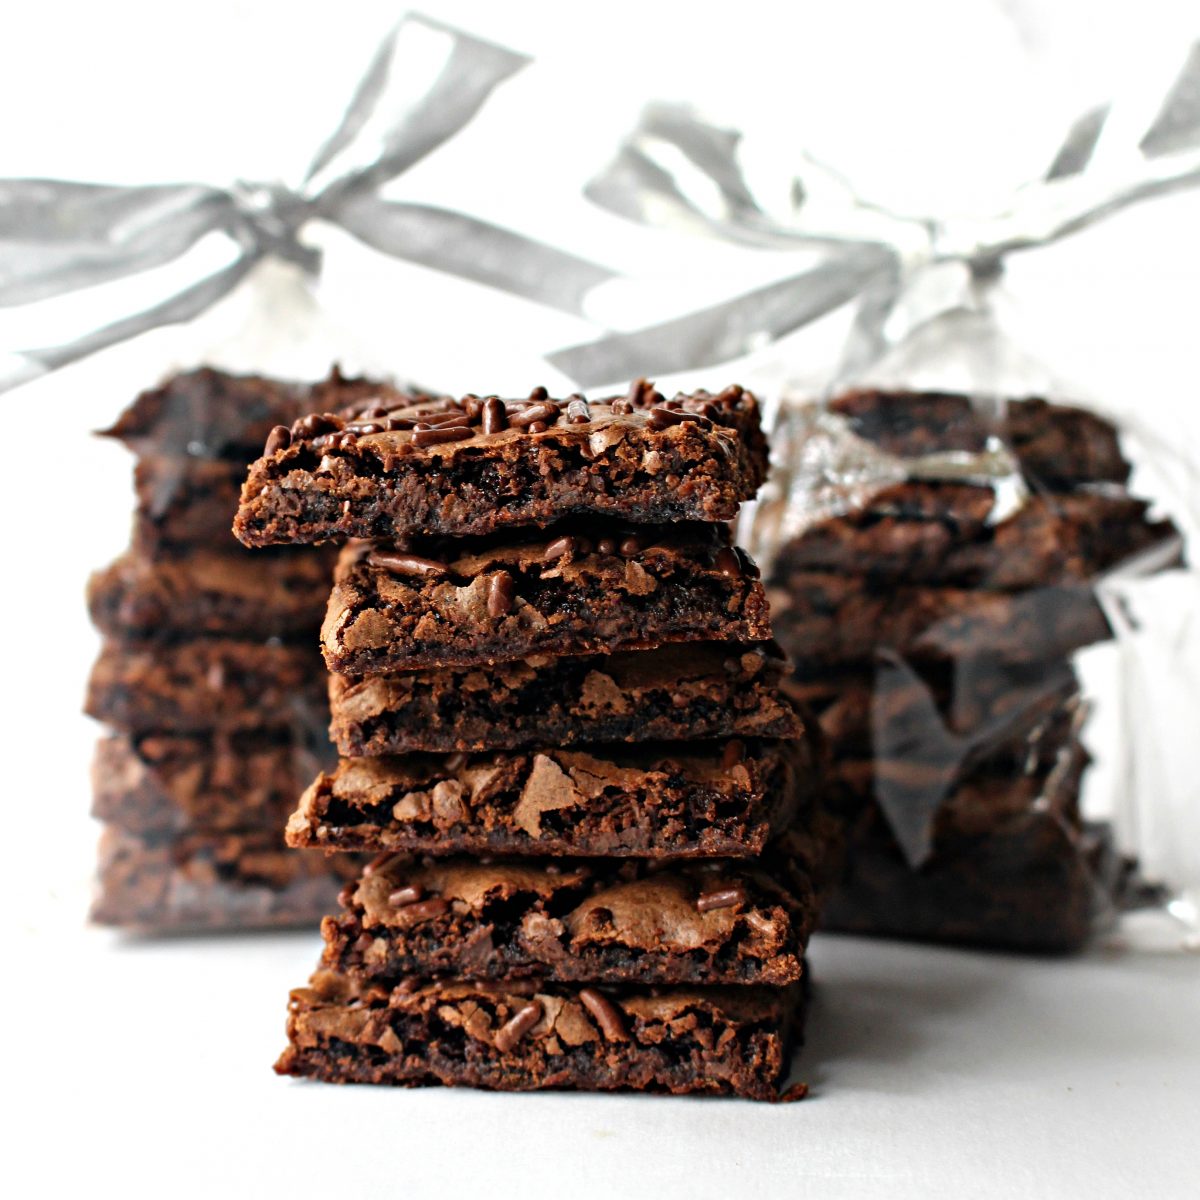 Three stacks of Malted Milk Brownie Bark, two wrapped in cellophane bags with silver bows.